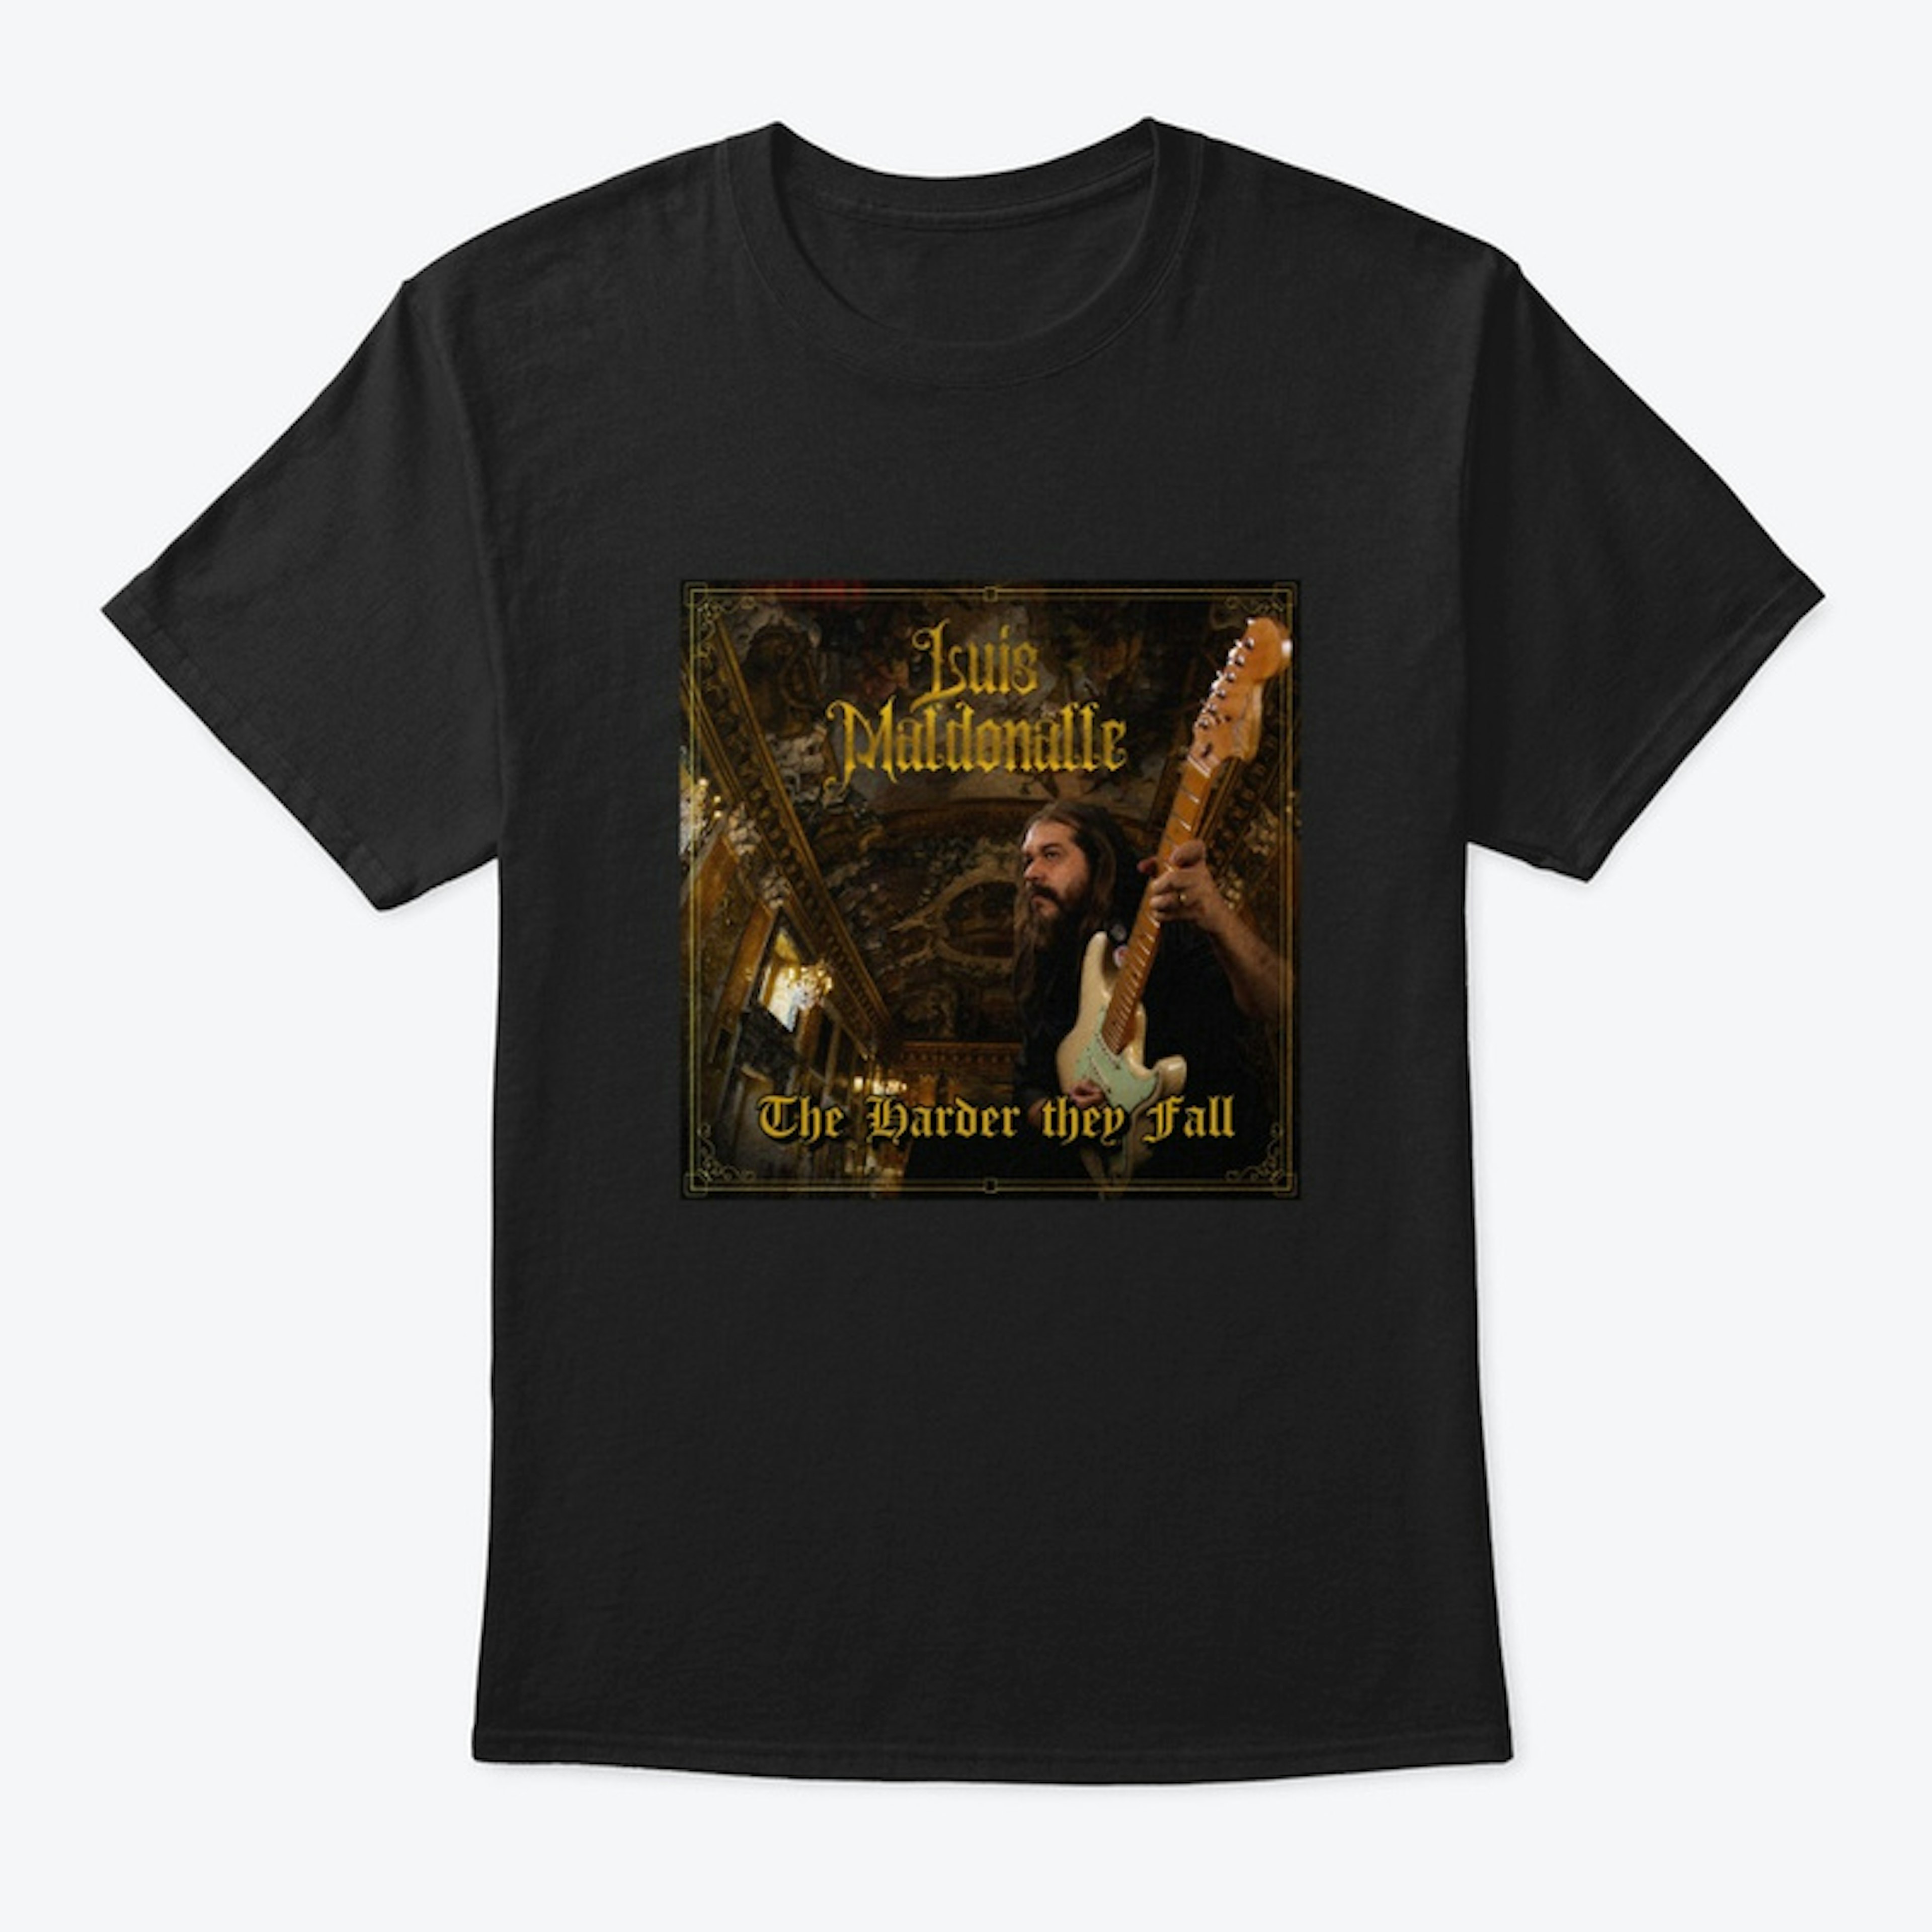 The Harder They Fall new T shirt